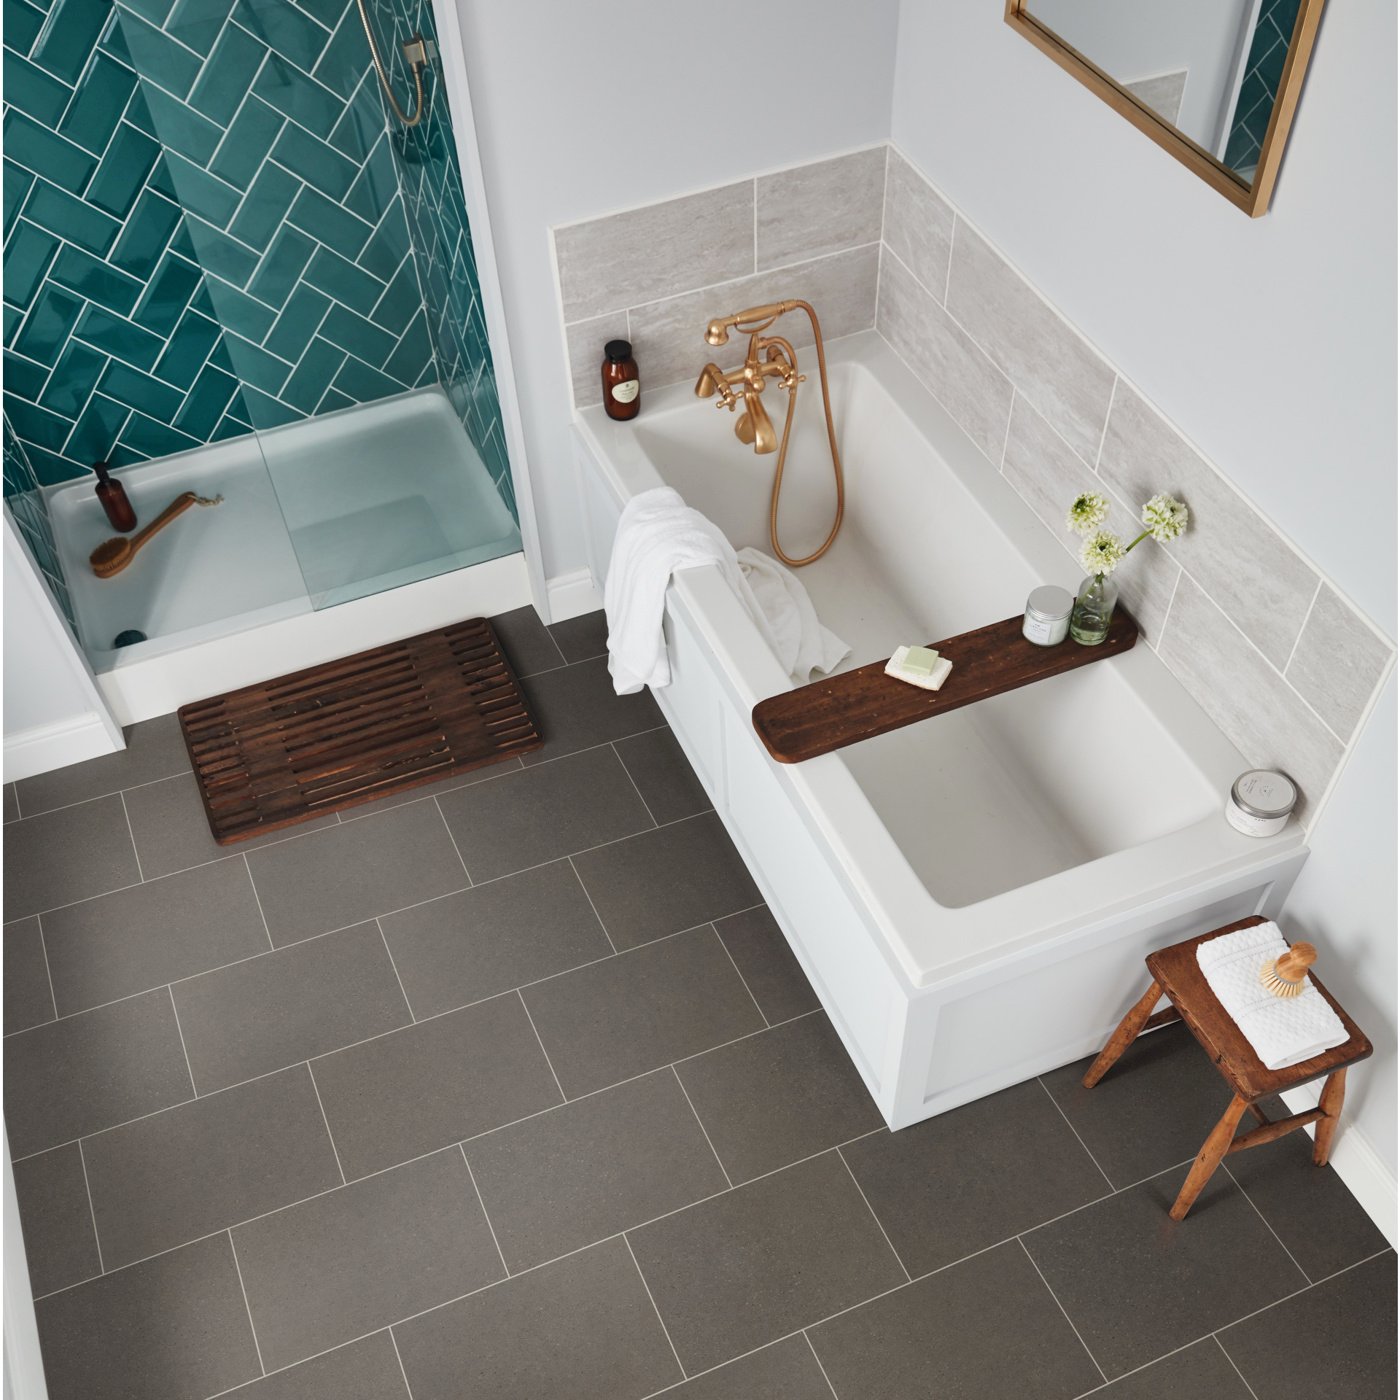 Bern Stone ST30 with DS12 design strips in a white and teal bathroom Knight Tile